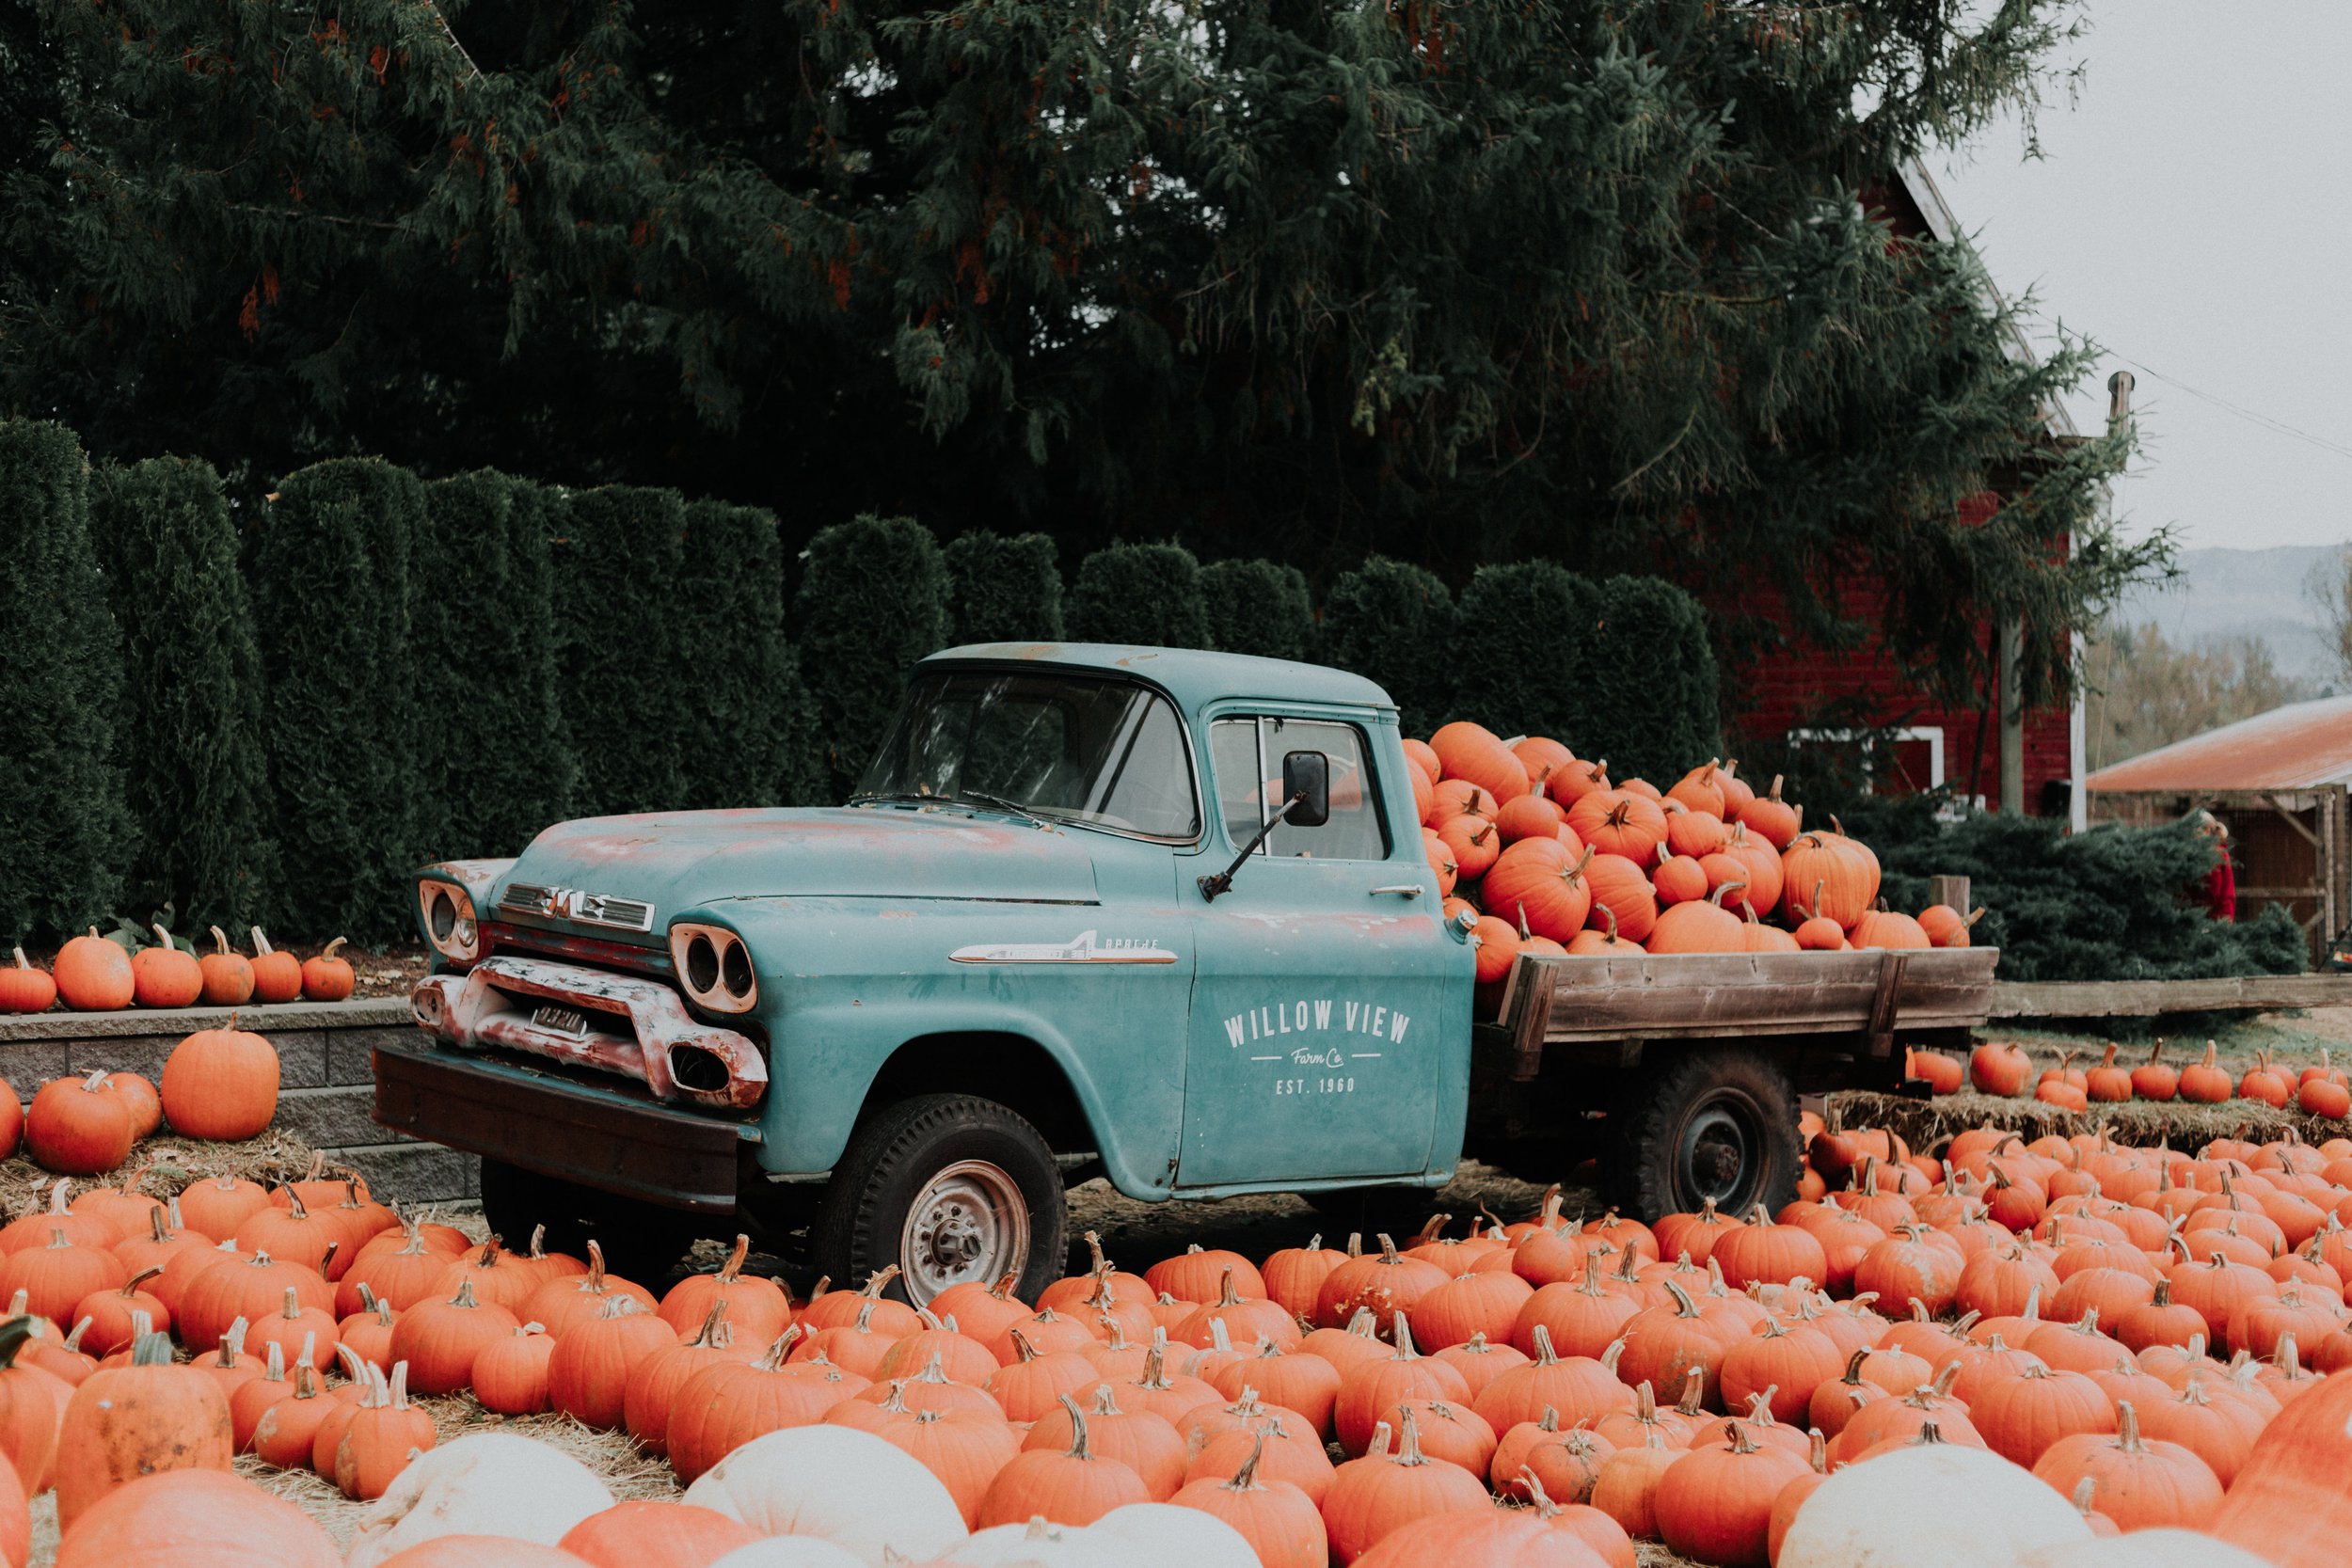 How to sell more tickets to your pumpkin patch events